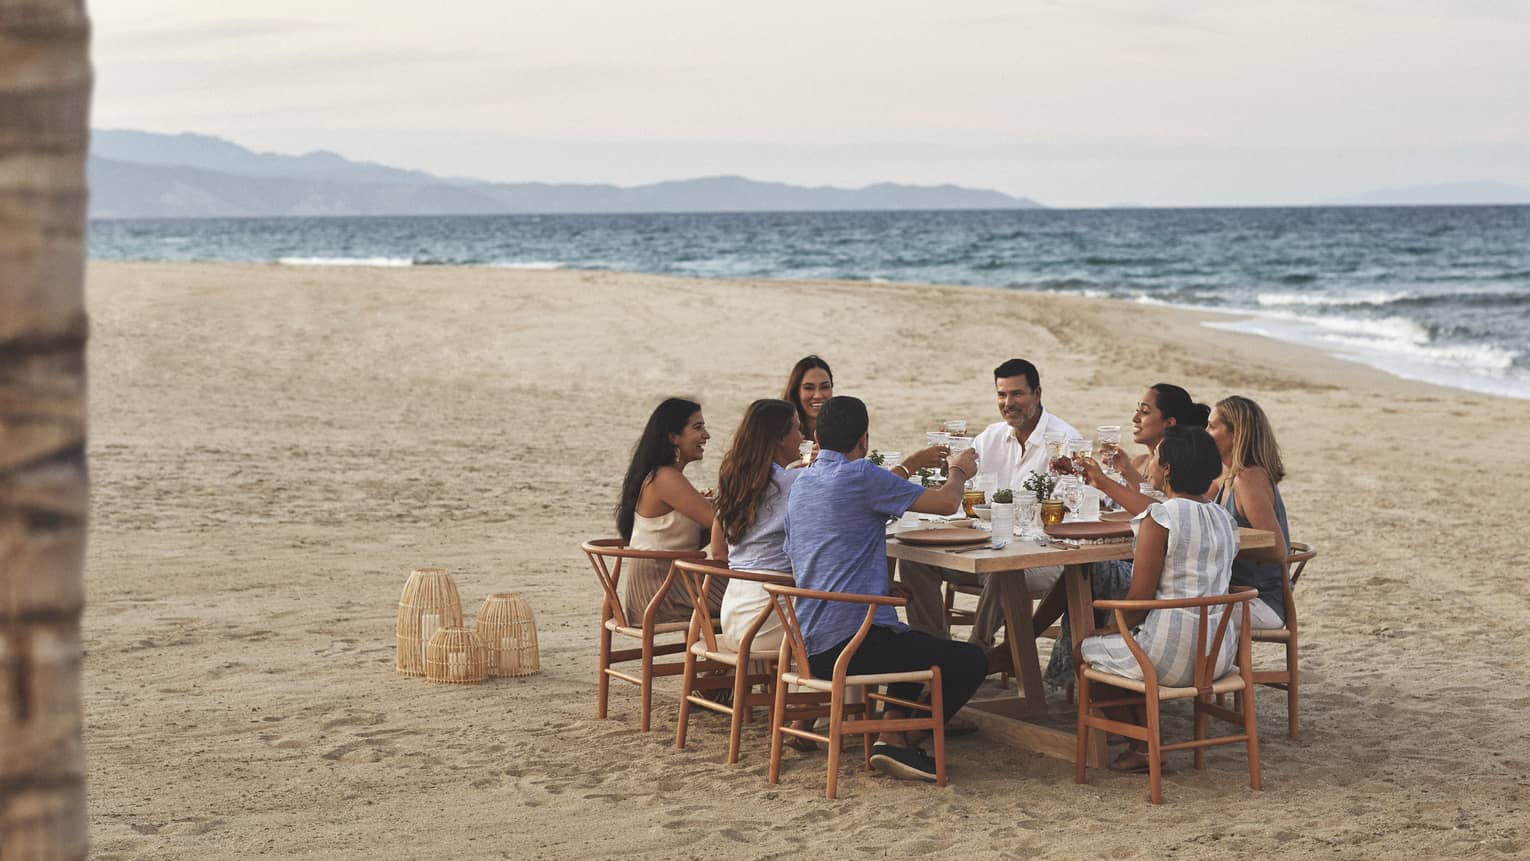 A group dines on the beach in wooden mid century modern dining chairs pulled up around a rectangular wooden dining table